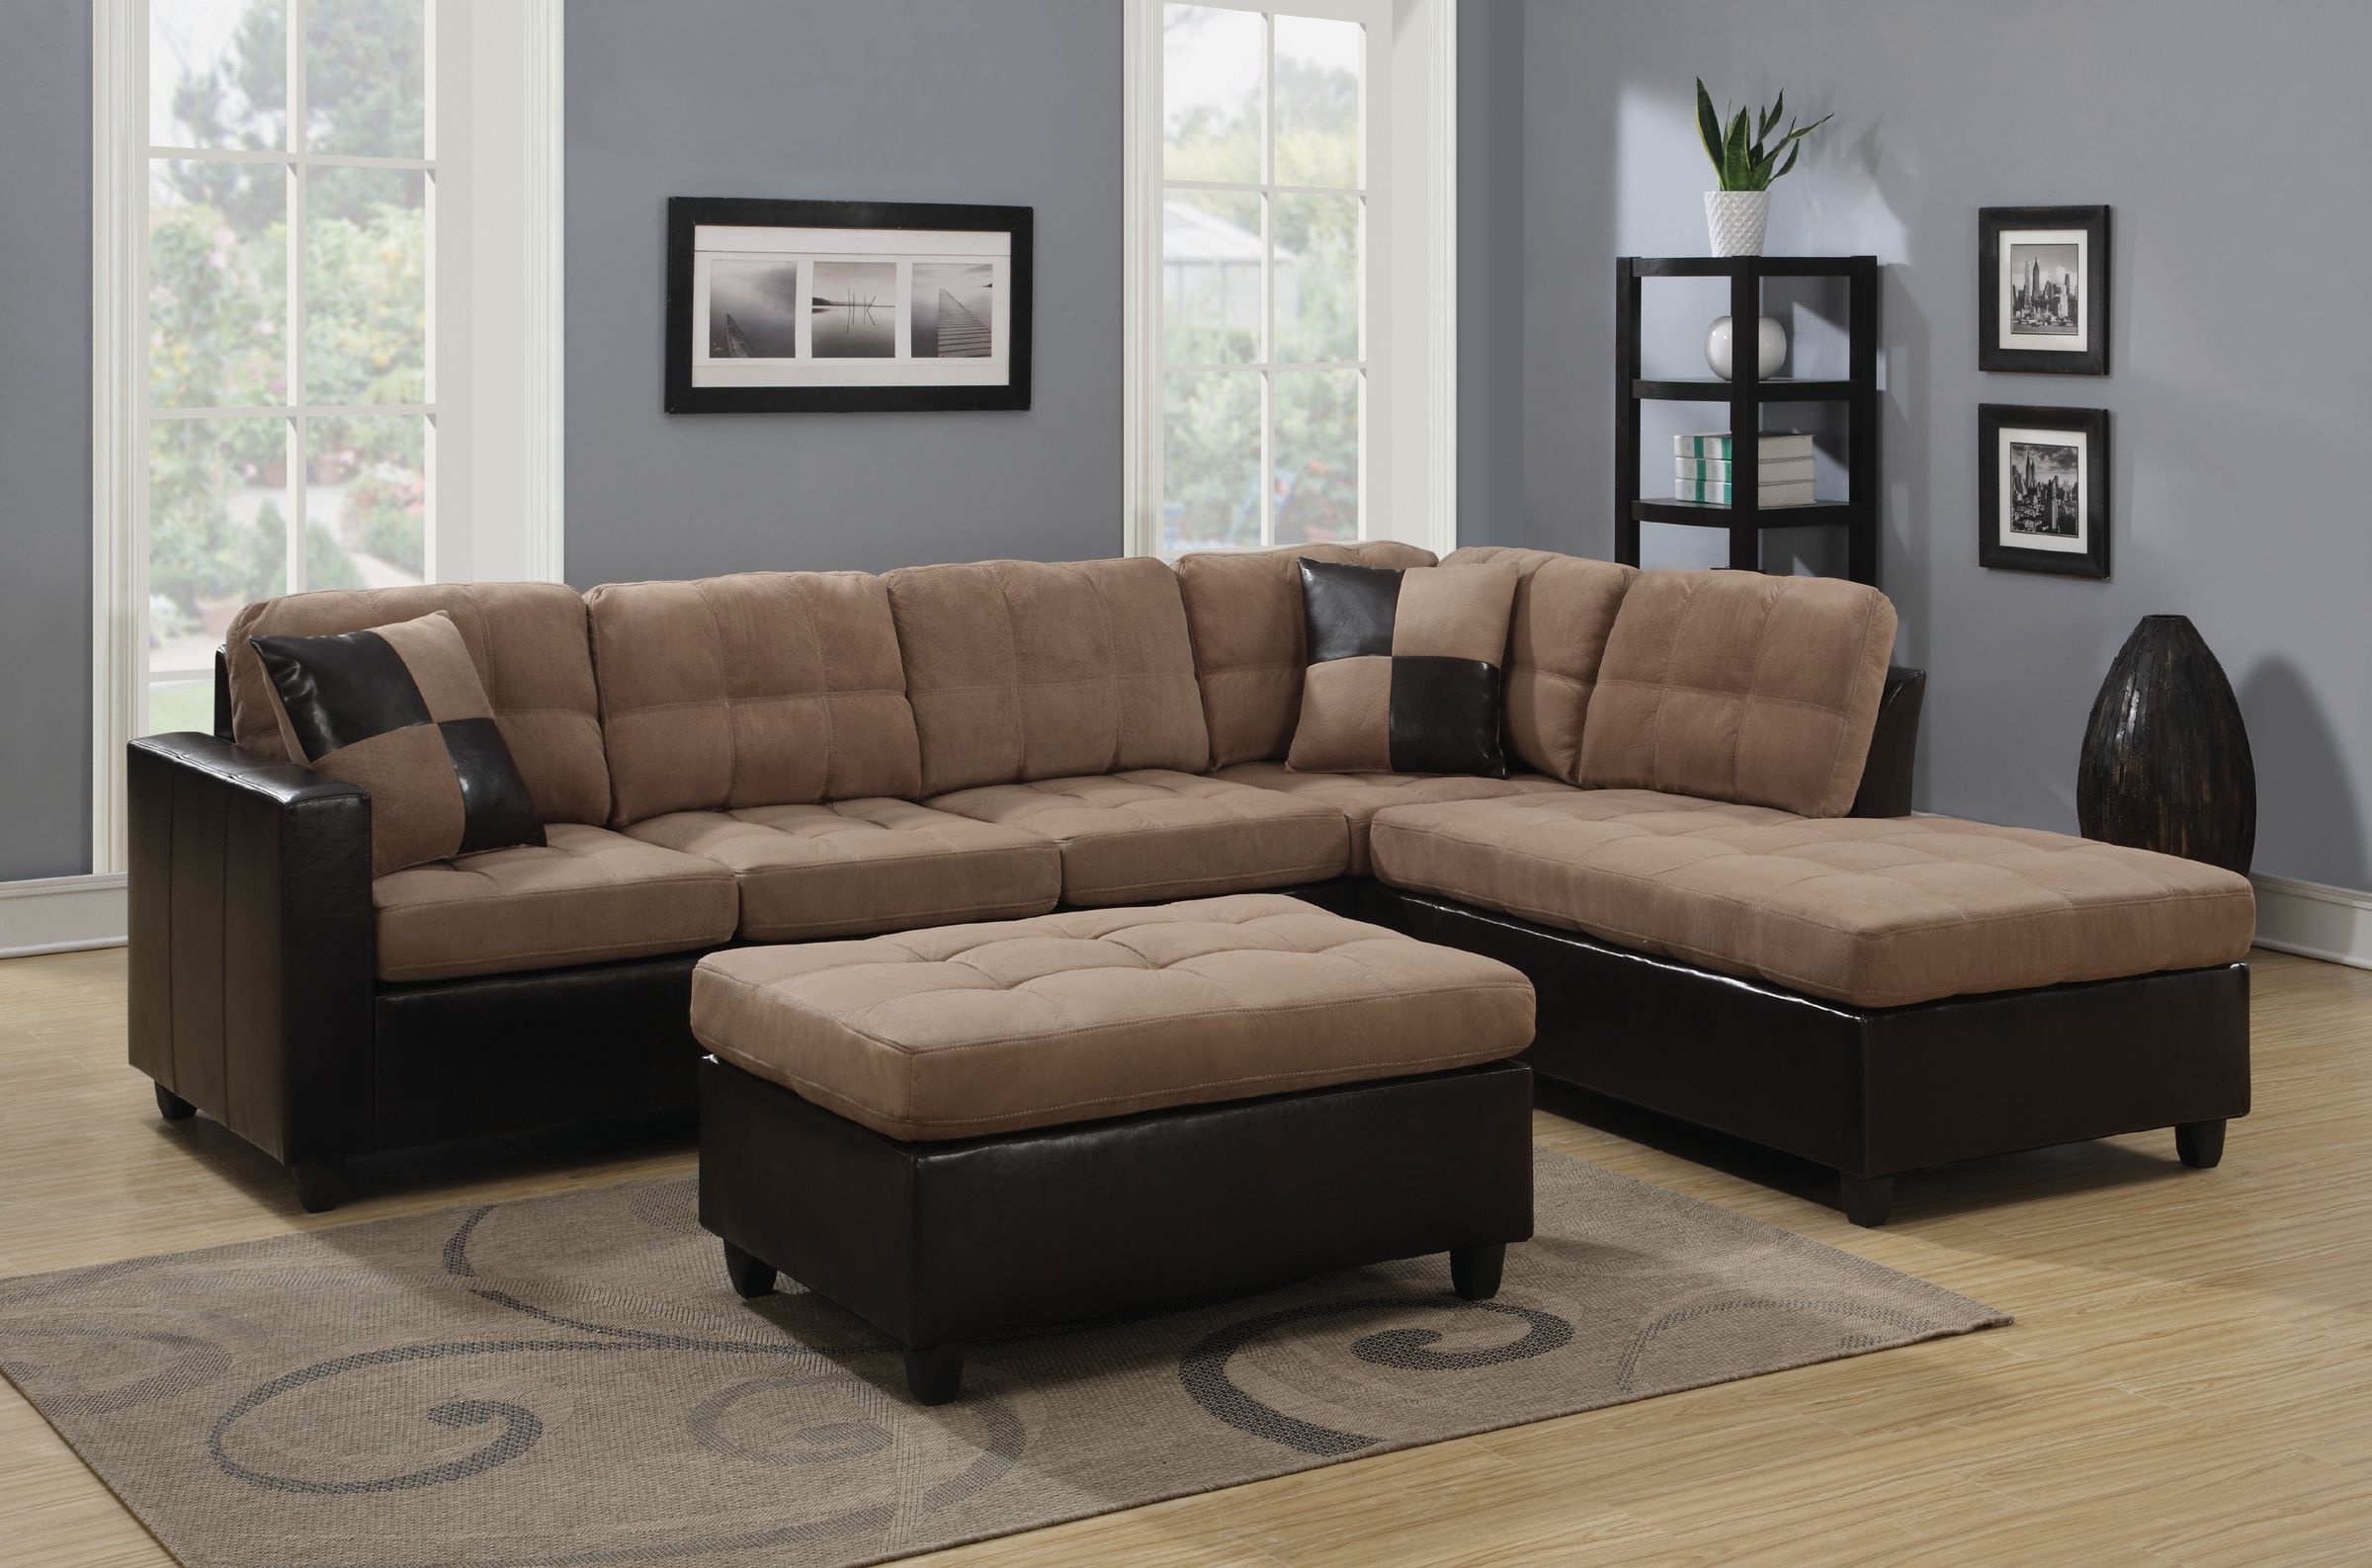 Reversible Tan Microfiber Sectional Sofa With Chaise Set Intended For Preferred Clifton Reversible Sectional Sofas With Pillows (View 4 of 25)